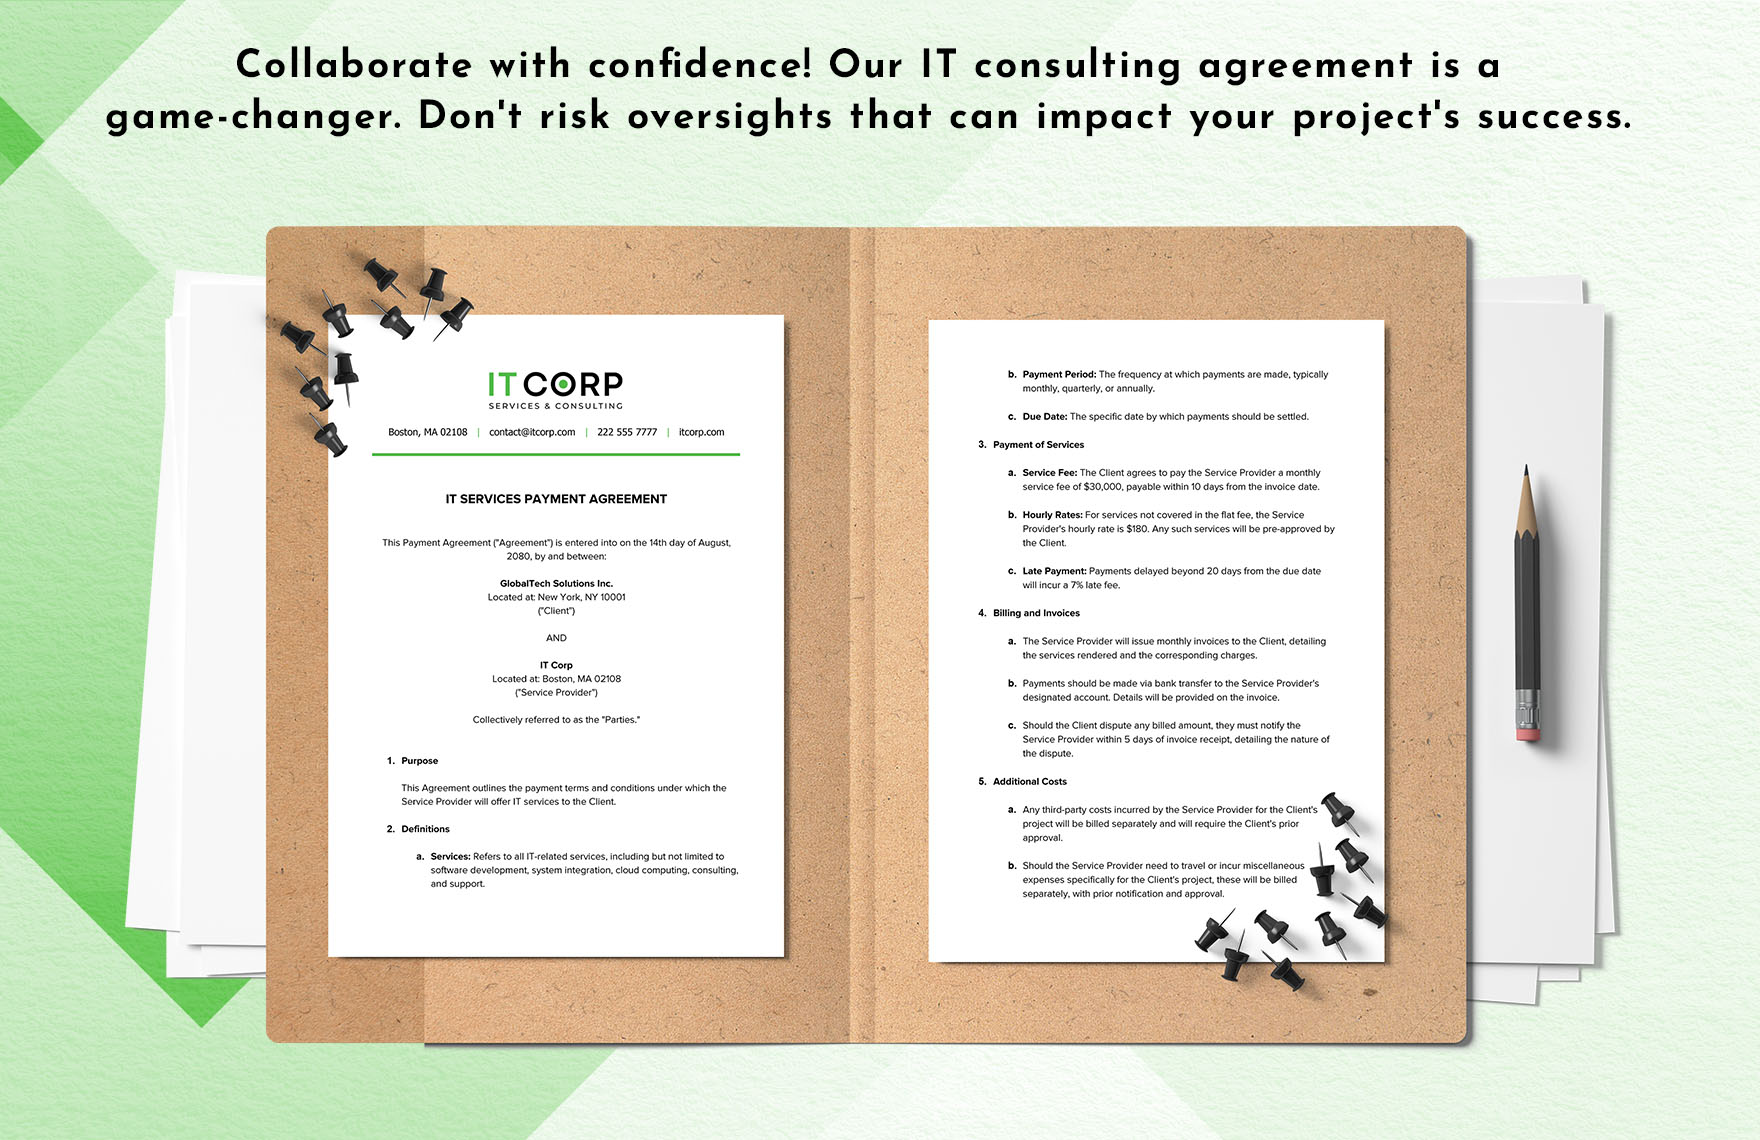 IT Services Payment Agreement Template